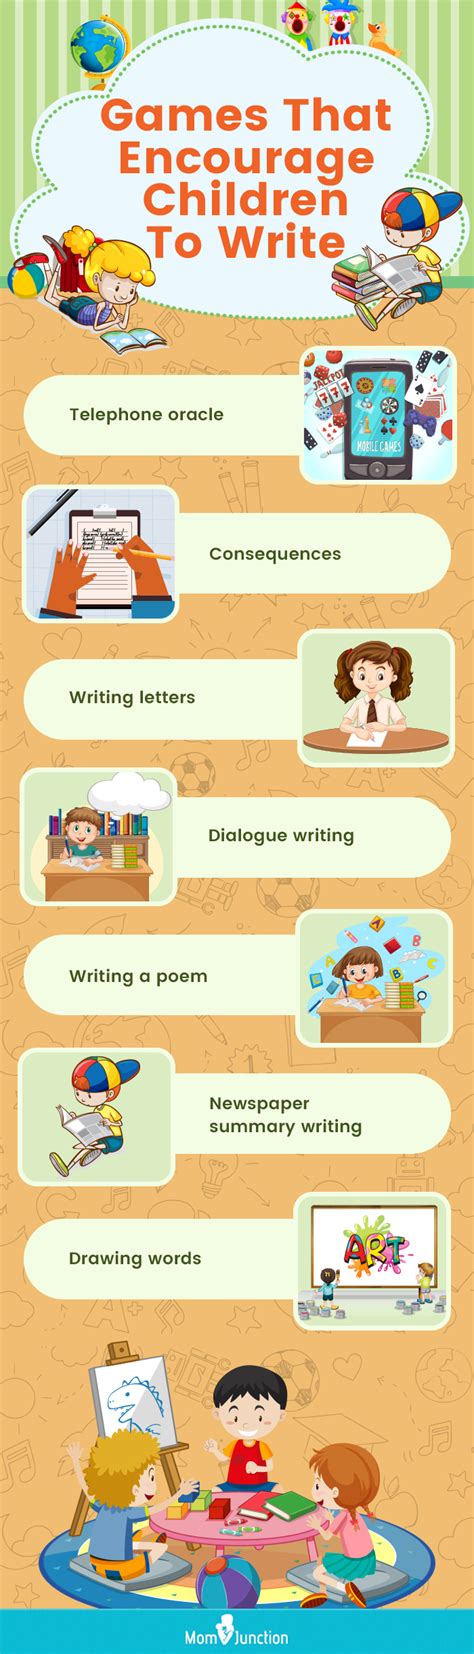 15 Creative Writing Games And Activities For Kids Writing Activities For Kids - Writing Activities For Kids